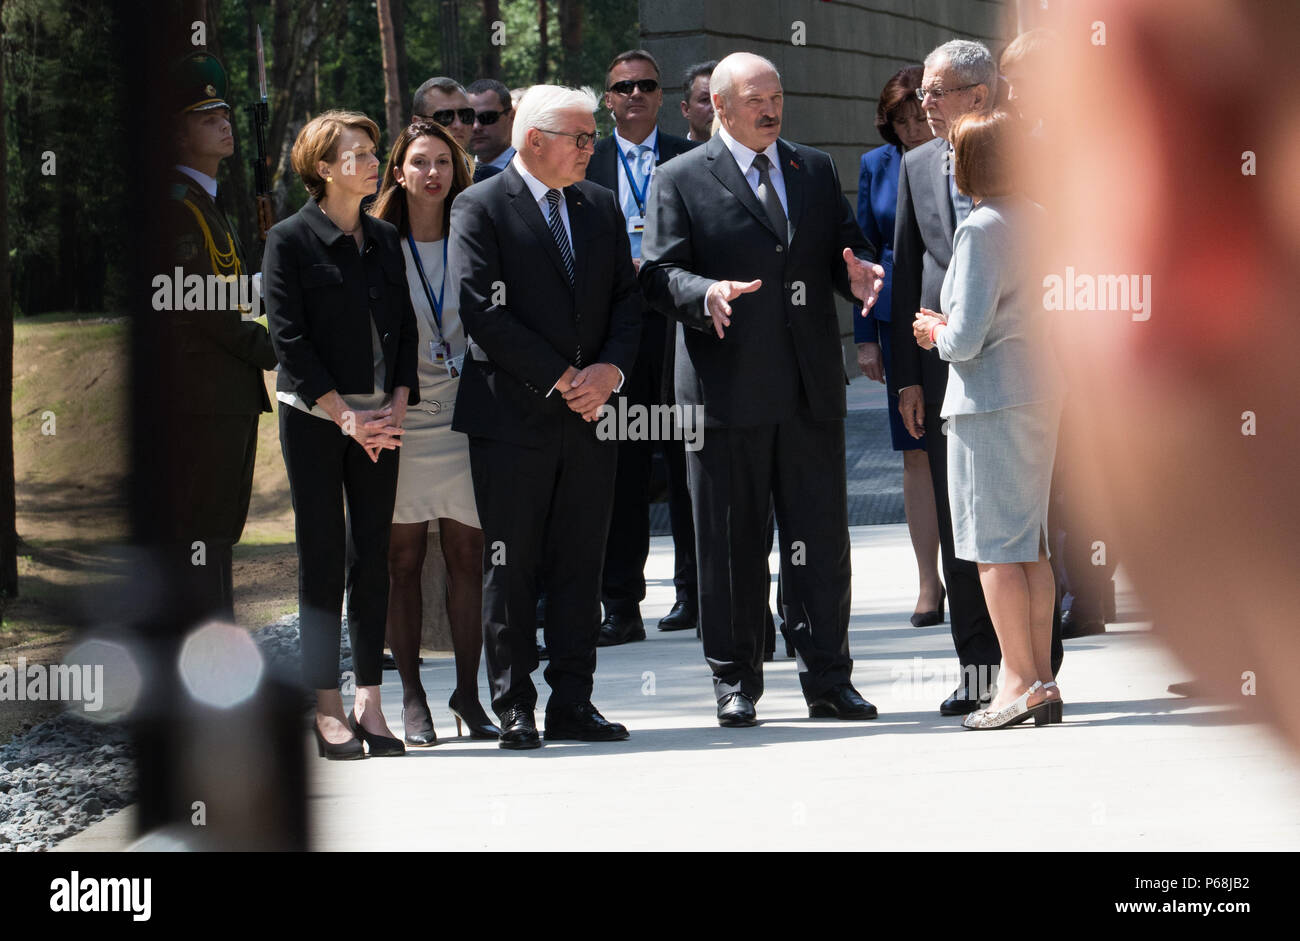 Minsk, Germany. 29th June, 2018. Elke Buedenbender (L-R), German President Frank-Walter Steinmeier of the Social Democratic Party (SPD), President of Belarus Alexandr Lukaschenko, and Austria's President Alexander Van der Bellen arrive for the inauguration of the memorial site Malyj Trostenez. Malyj Trostenez was the largest National Socialist extermination camp on the grounds of the former Sovier Union. However, like many other areas on the former Soviet Union, it is not well-known in Germany and Europe. Credit: Jörg Carstensen/dpa/Alamy Live News Stock Photo